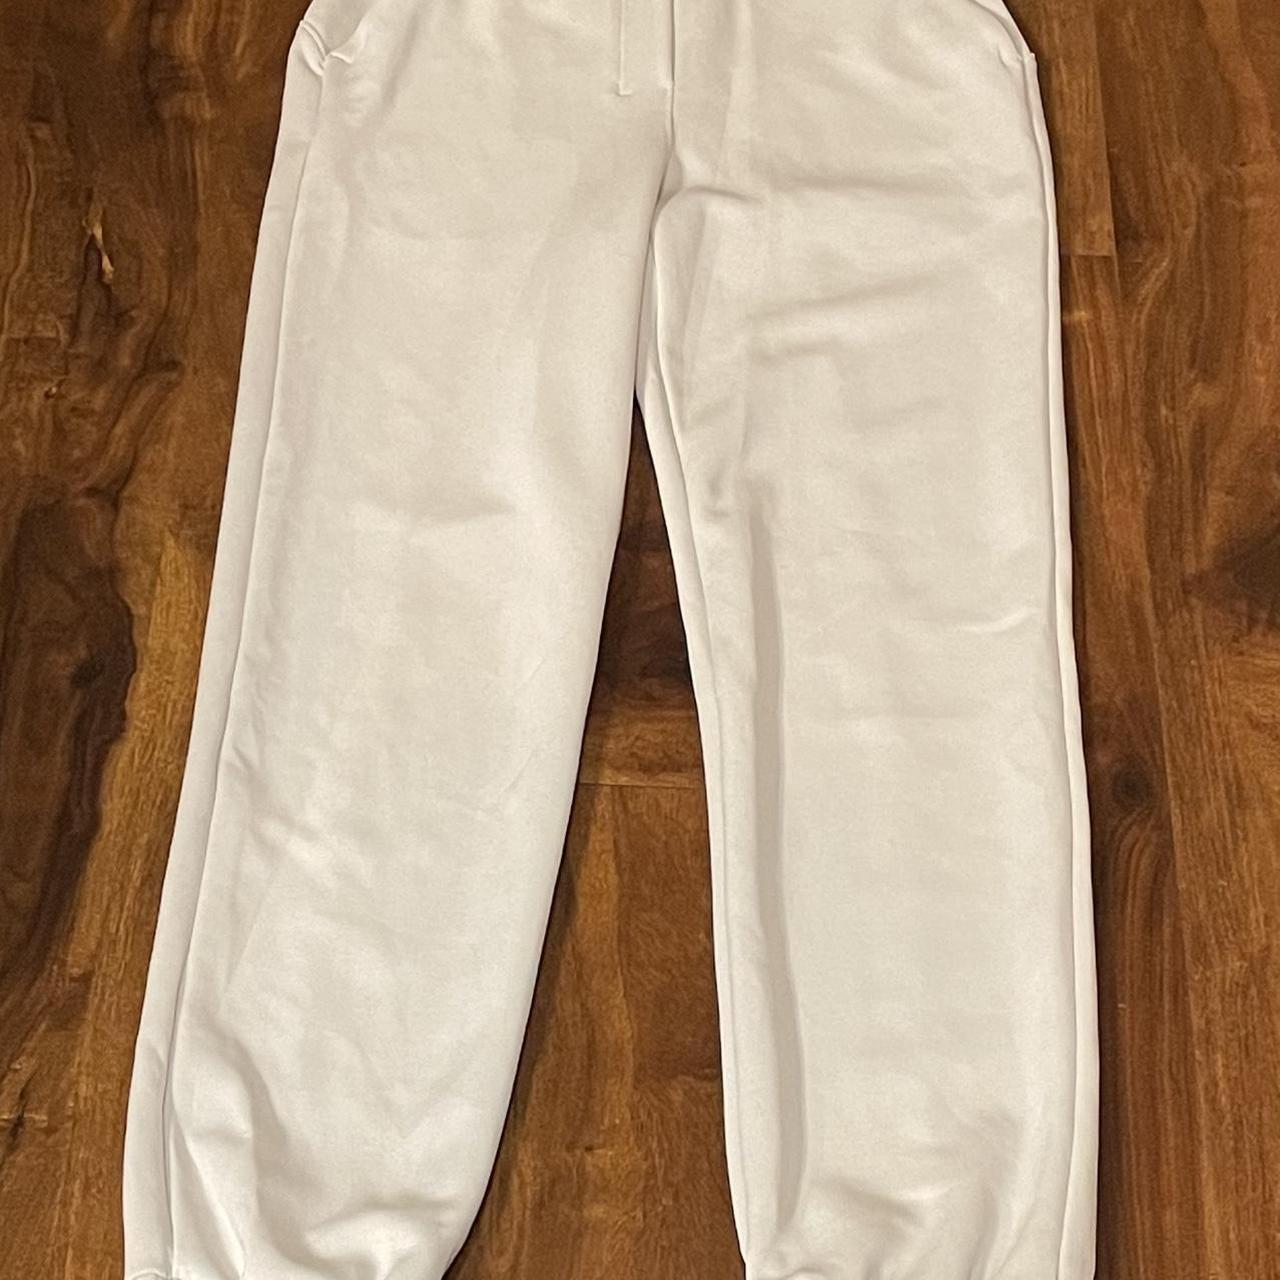 Lululemon Softstreme Relaxed High-Rise Pant. Never